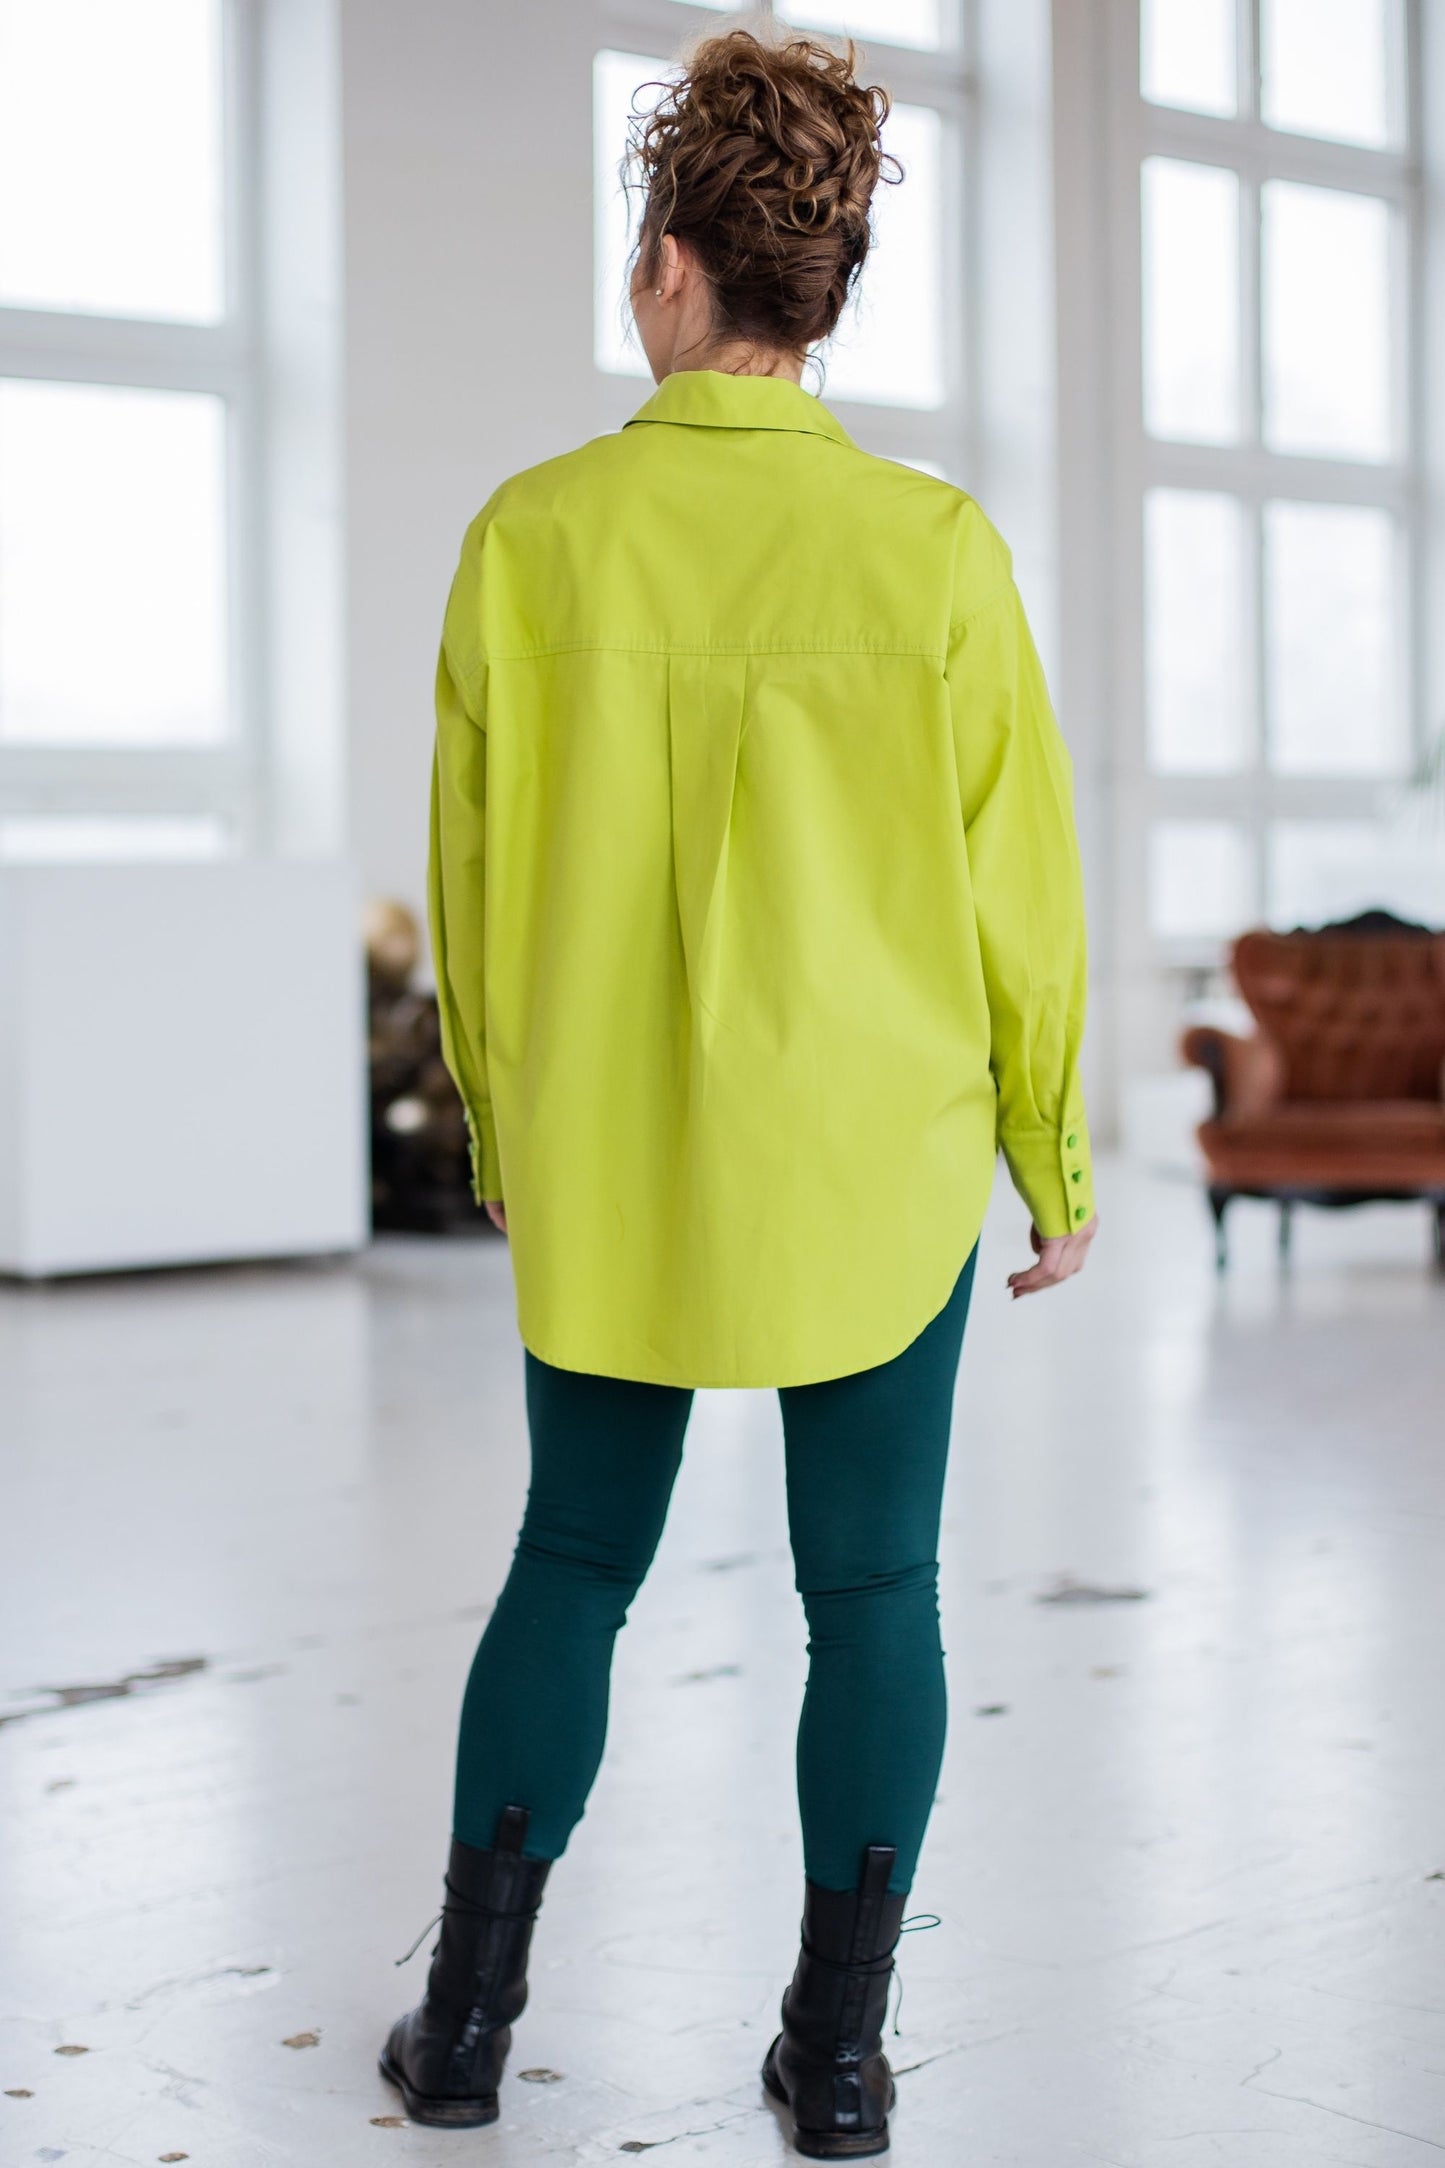 Bright lime-colored organic cotton shirt with buttons